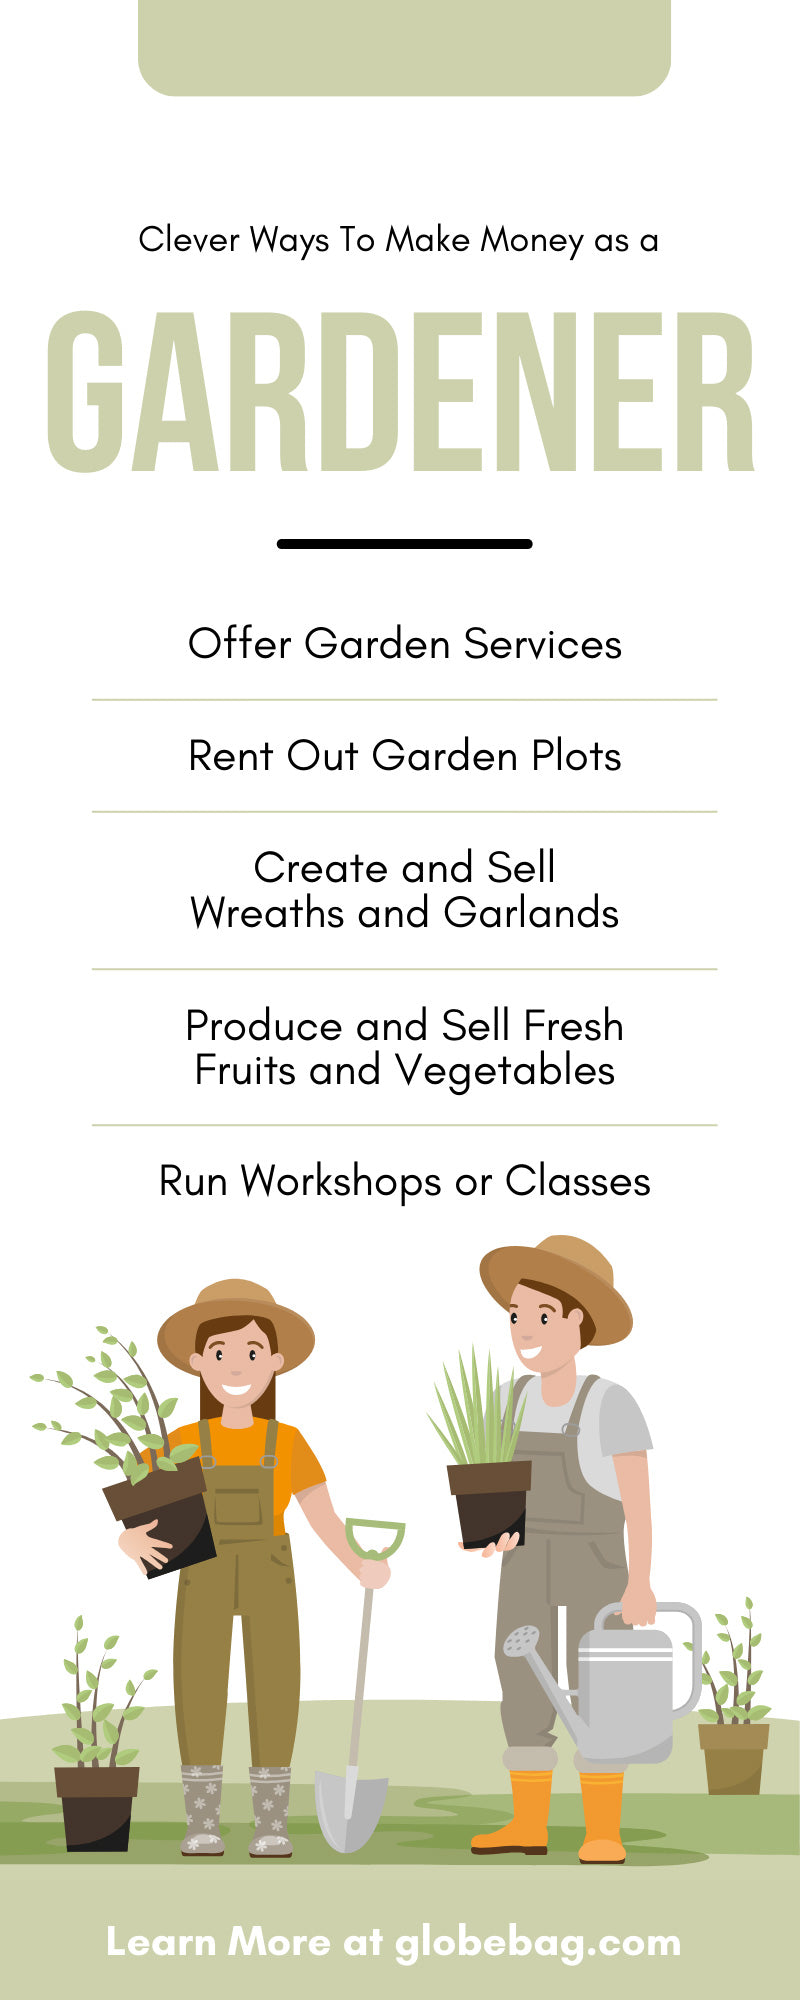 Clever Ways To Make Money as a Gardener